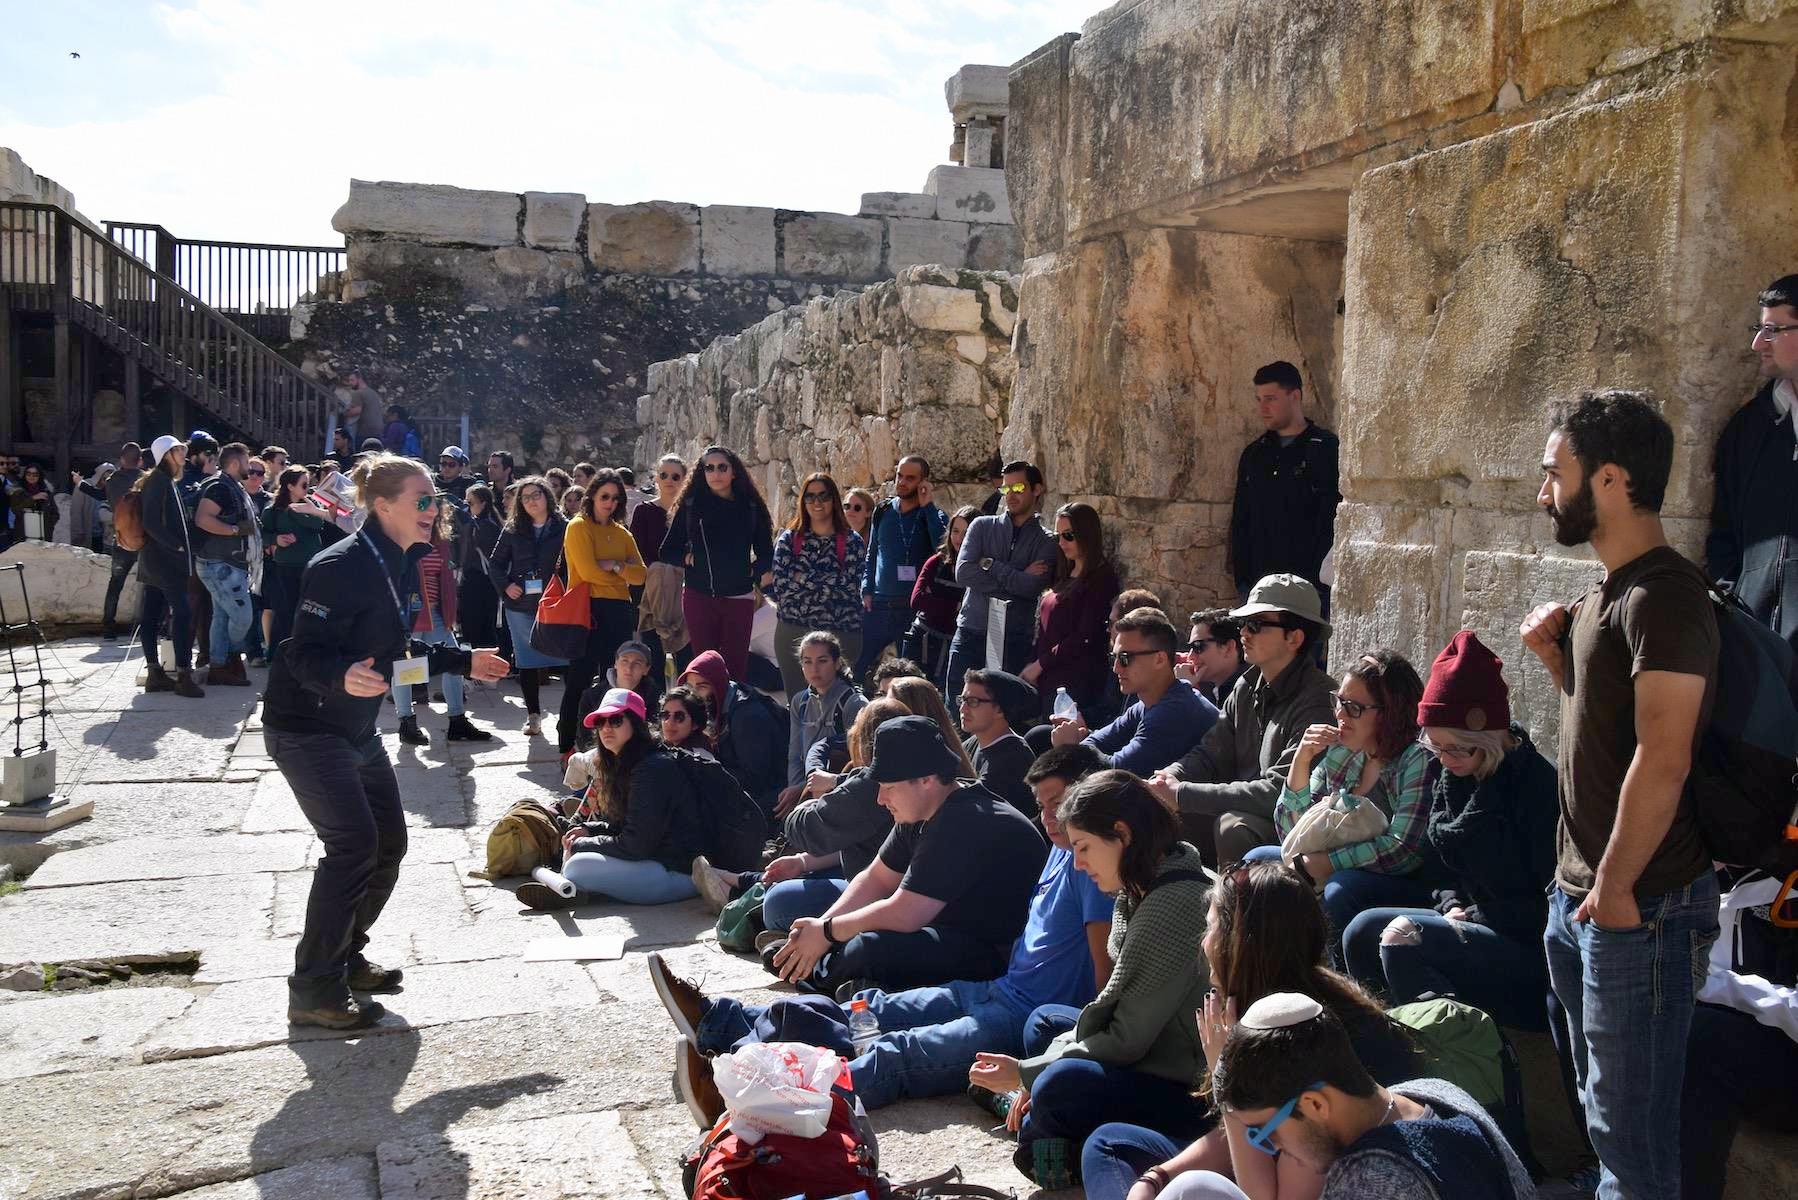 Top 3 Things You'll Experience With An Expert Tour Guide In Israel